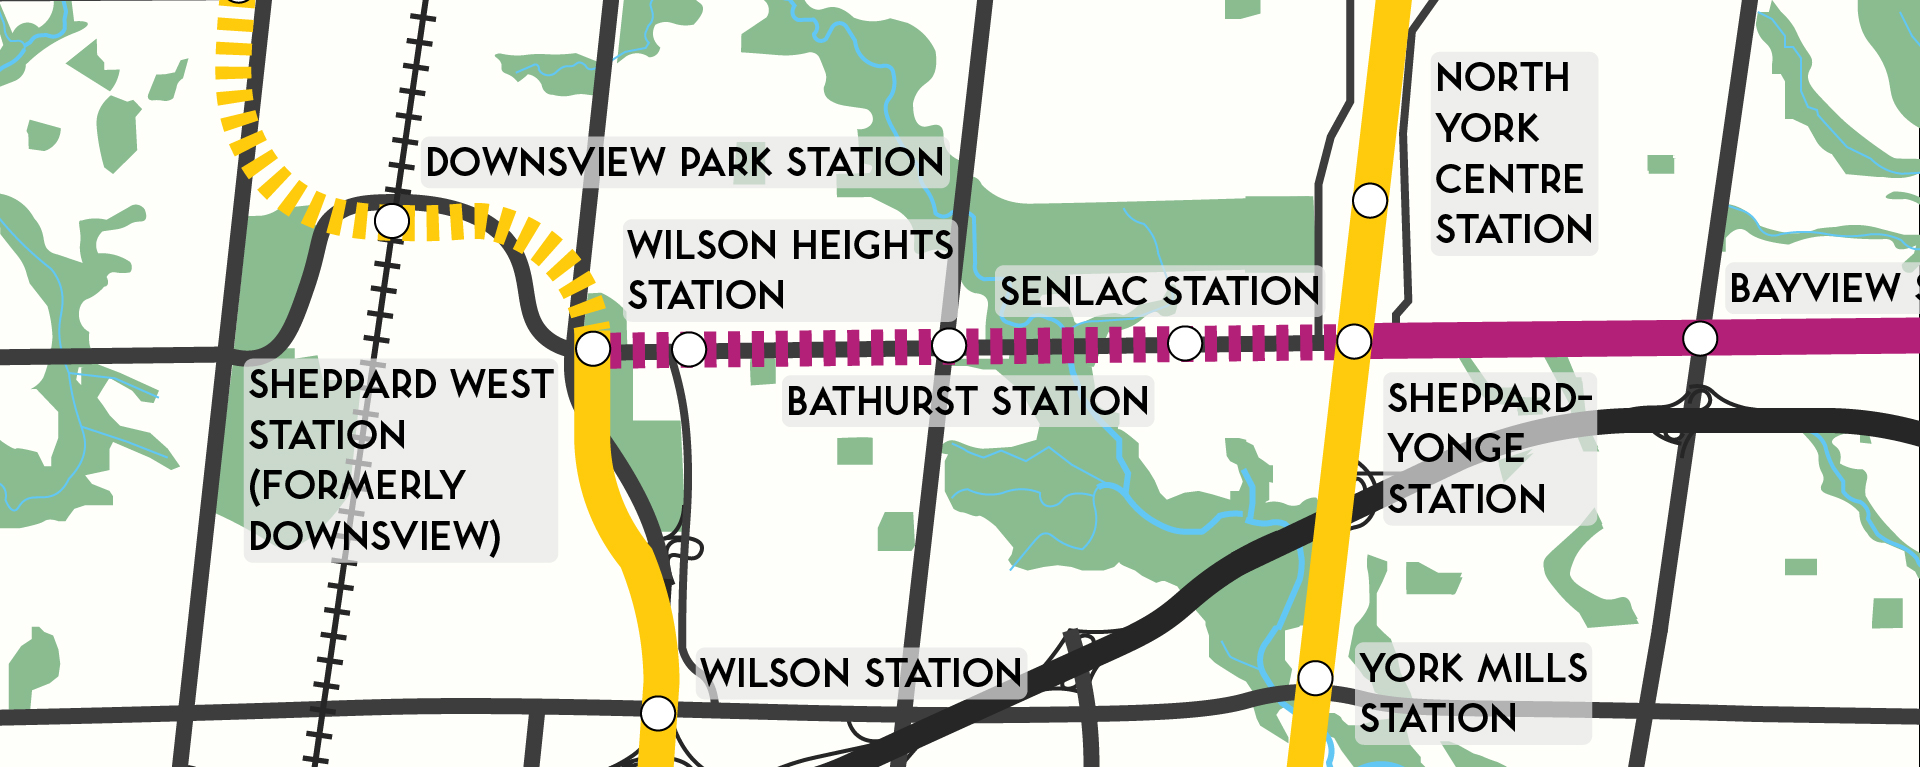 This image shows the alignment of the proposed extension of the Sheppard subway westwards, with three new stations at Senlac Road, Bathurst Avenue, and Wilson Heights Boulevard. A new connection to the Spadina segment of the Yonge-University subway would be made at Downsview station.